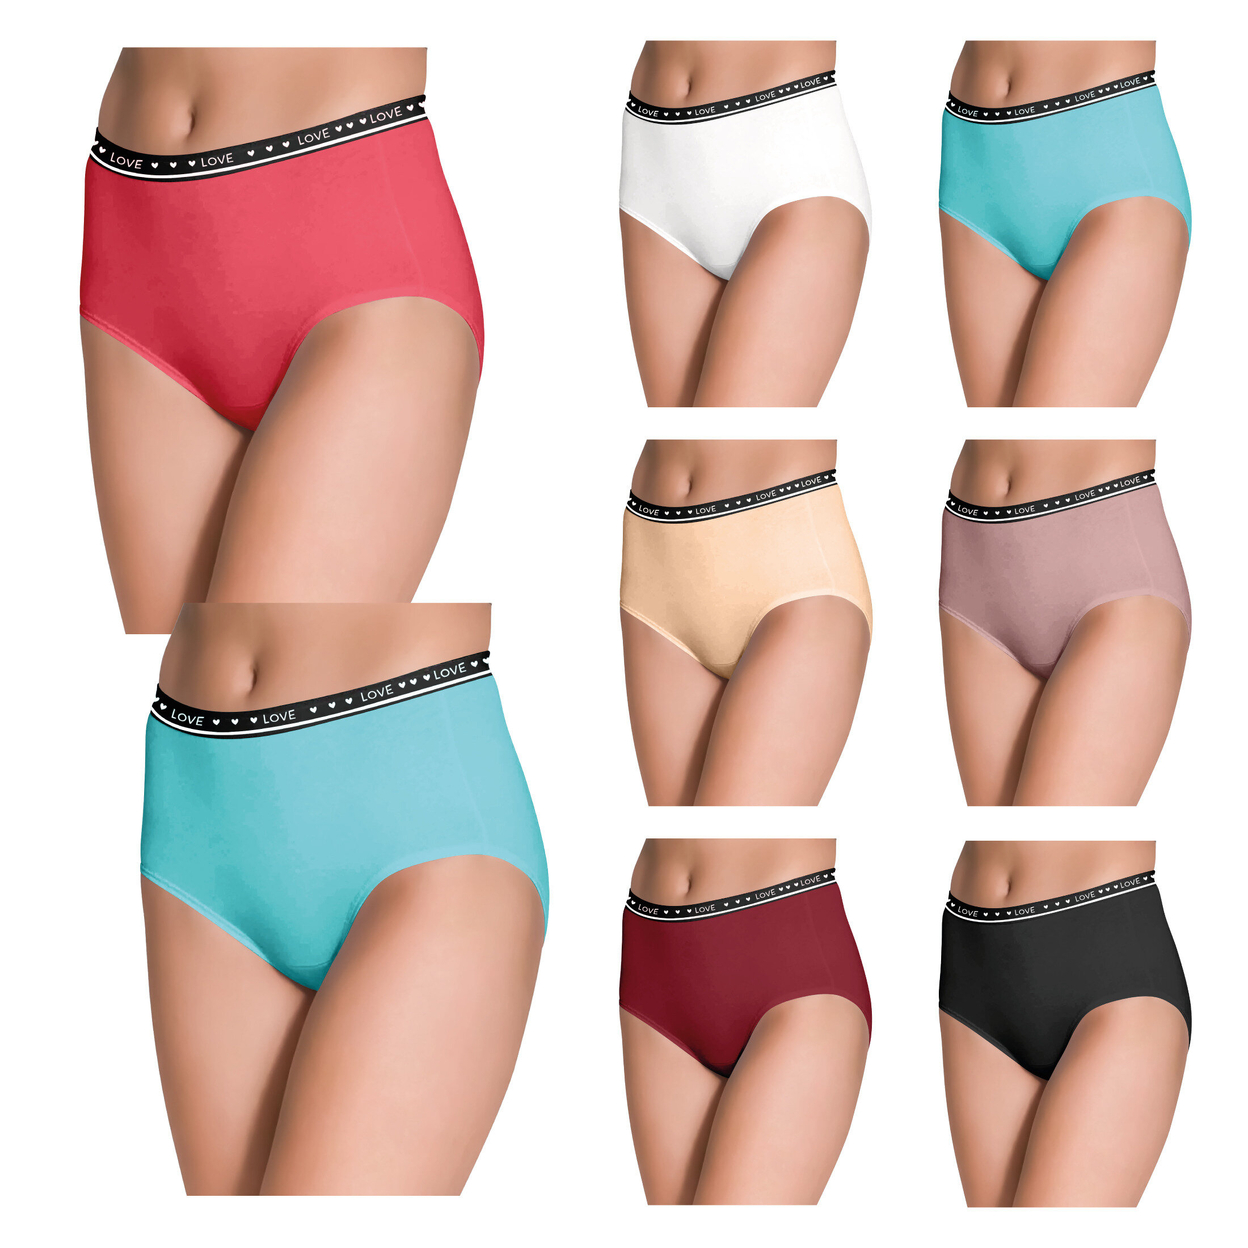 12-Pack: Women's Ultra Soft Moisture Wicking Panties Cotton Perfect Fit Underwear (Plus Sizes Available) - Small